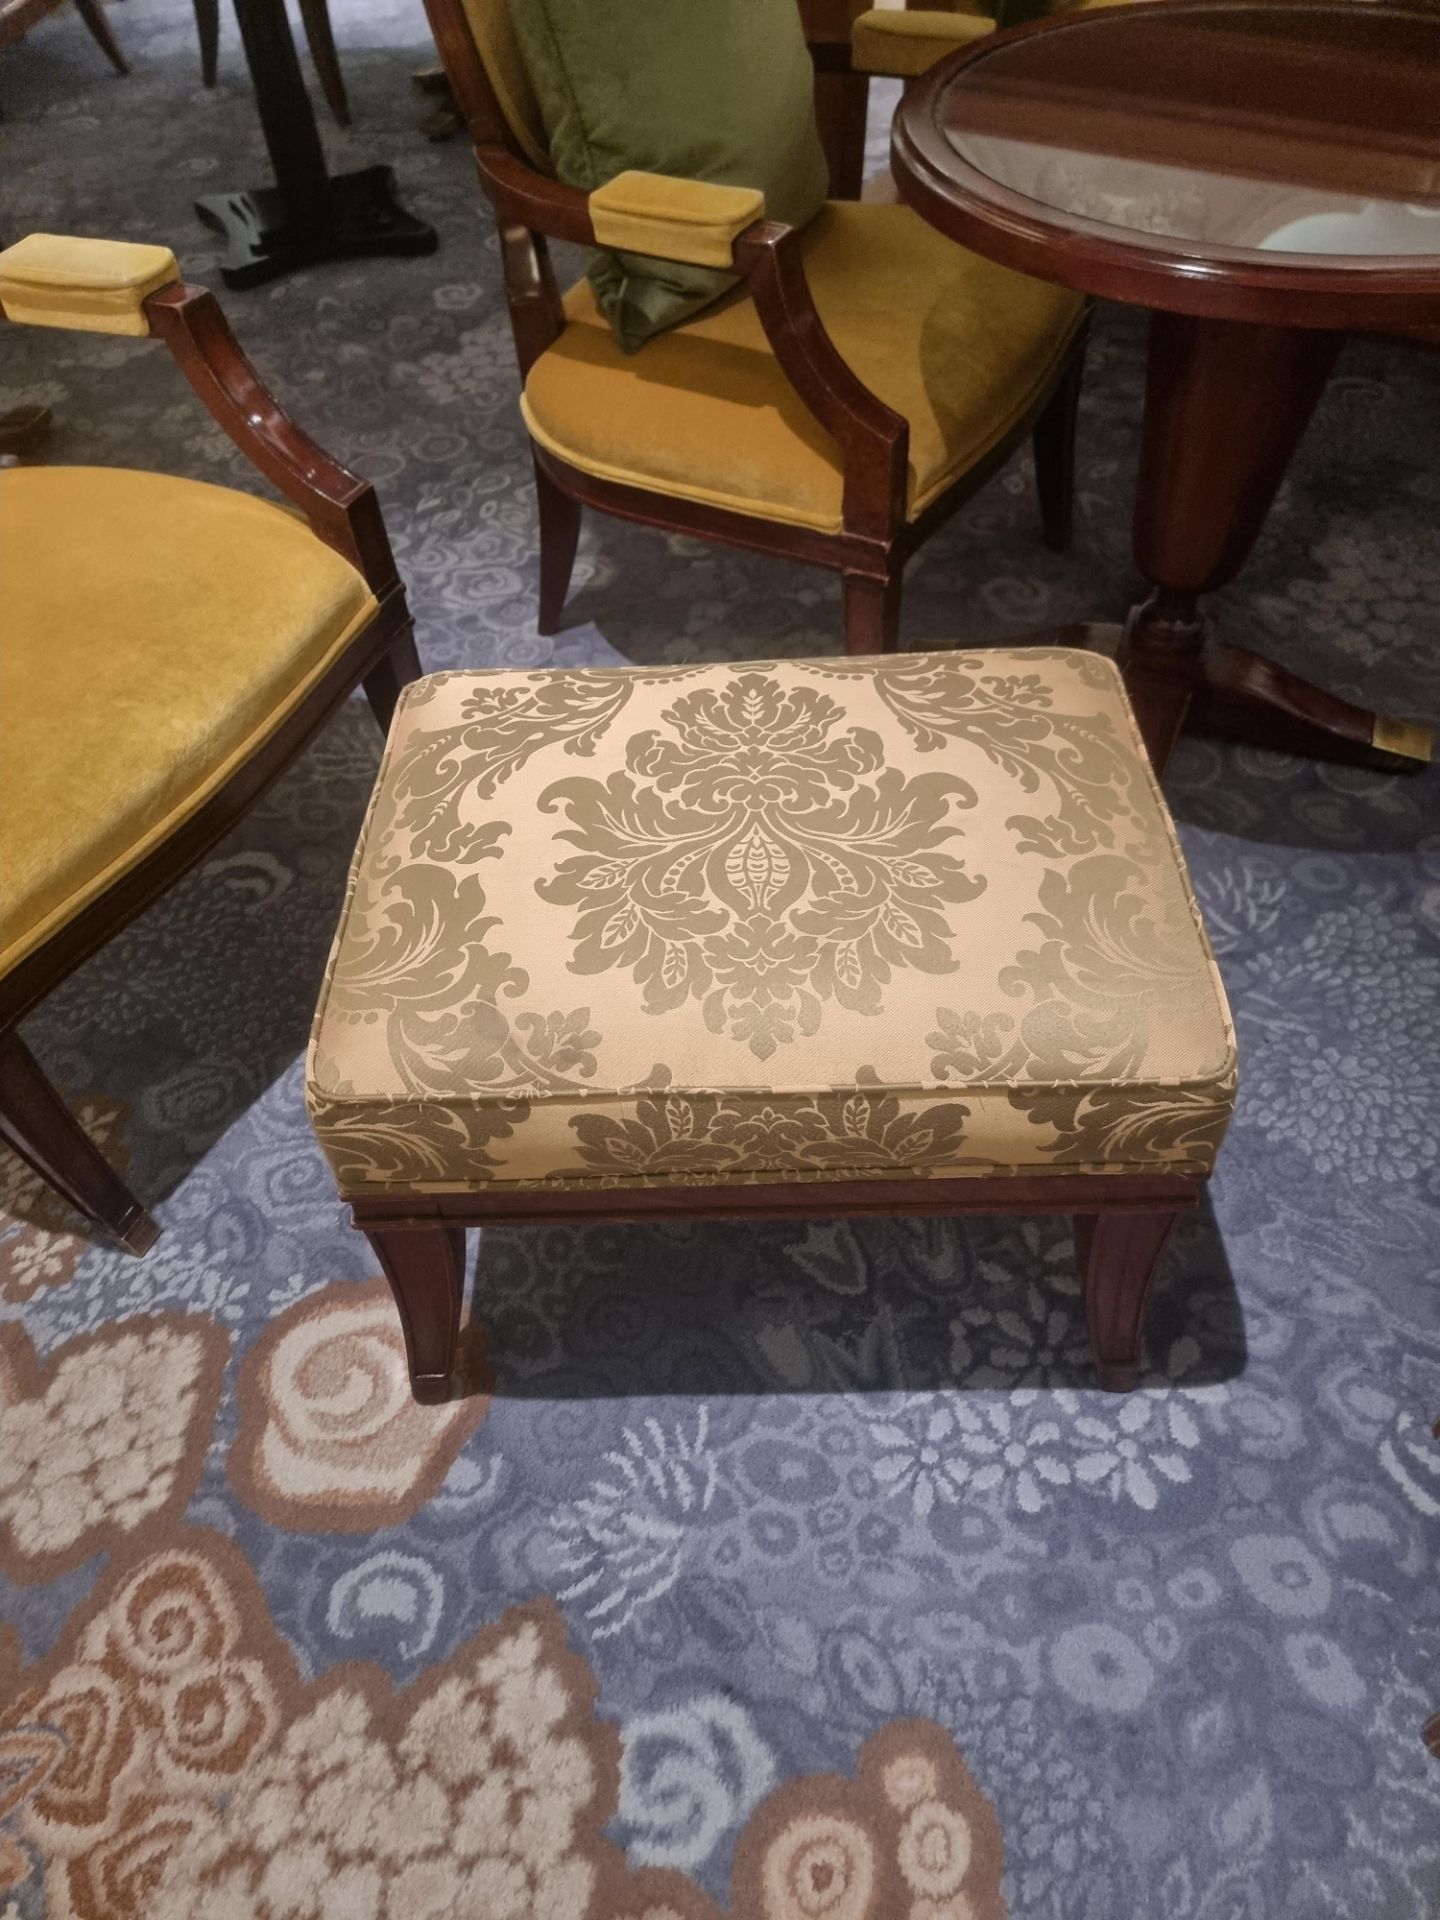 Walnut Framed Padded Upholstered Stool In Pierre Frey Damask Tournelle Gold And Green Pattern 45 x - Bild 3 aus 3